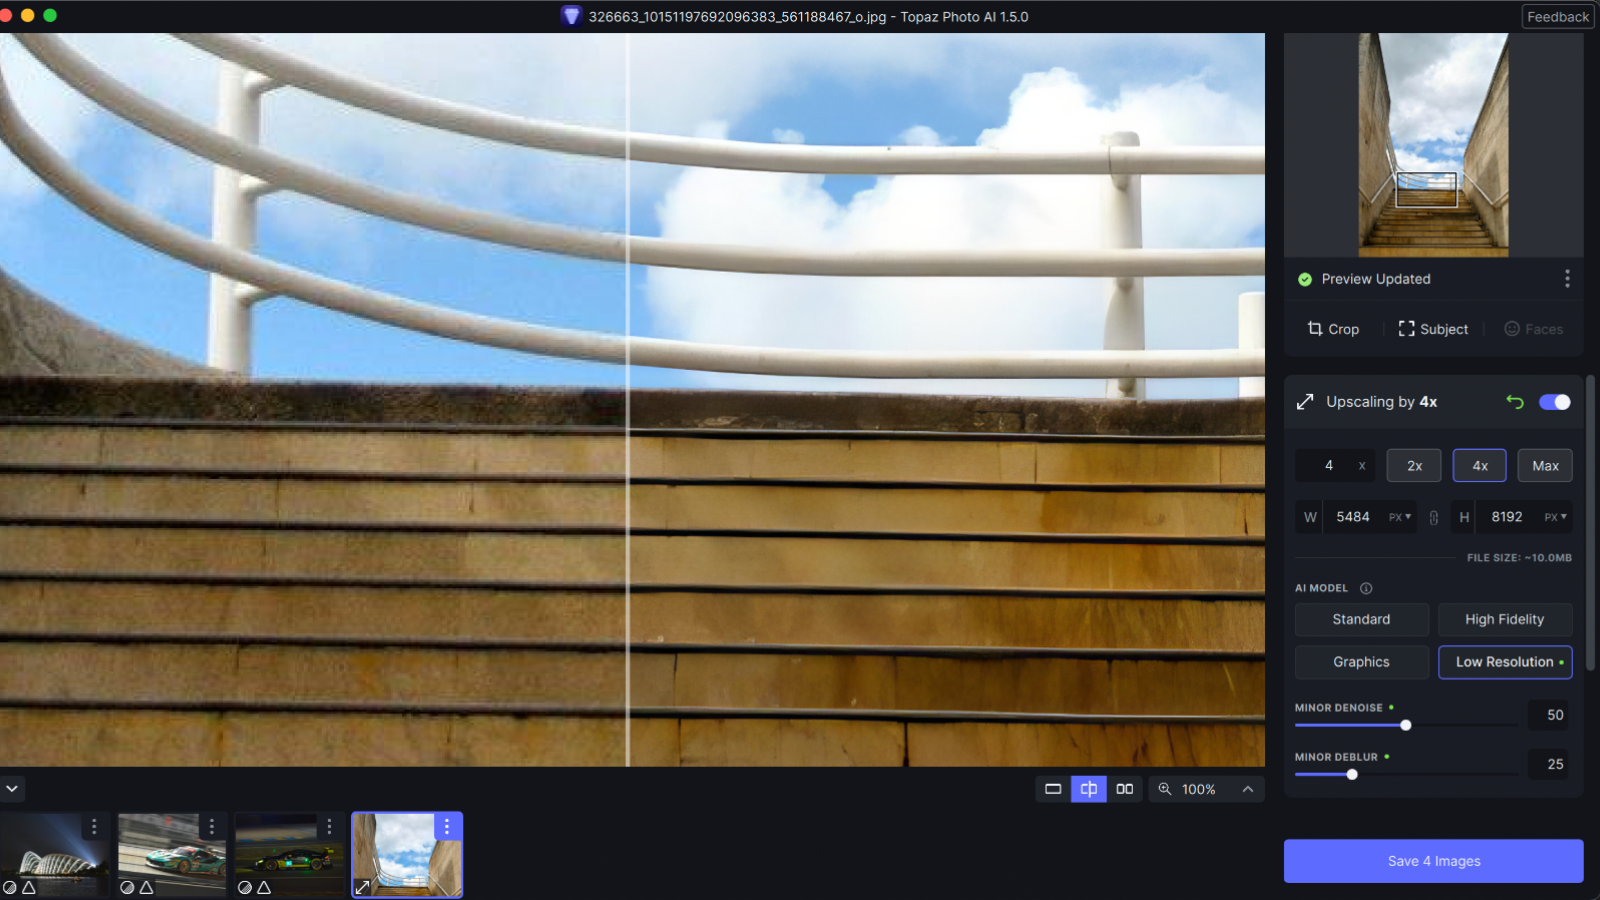 Topaz Photo AI upscaling an image of stairs